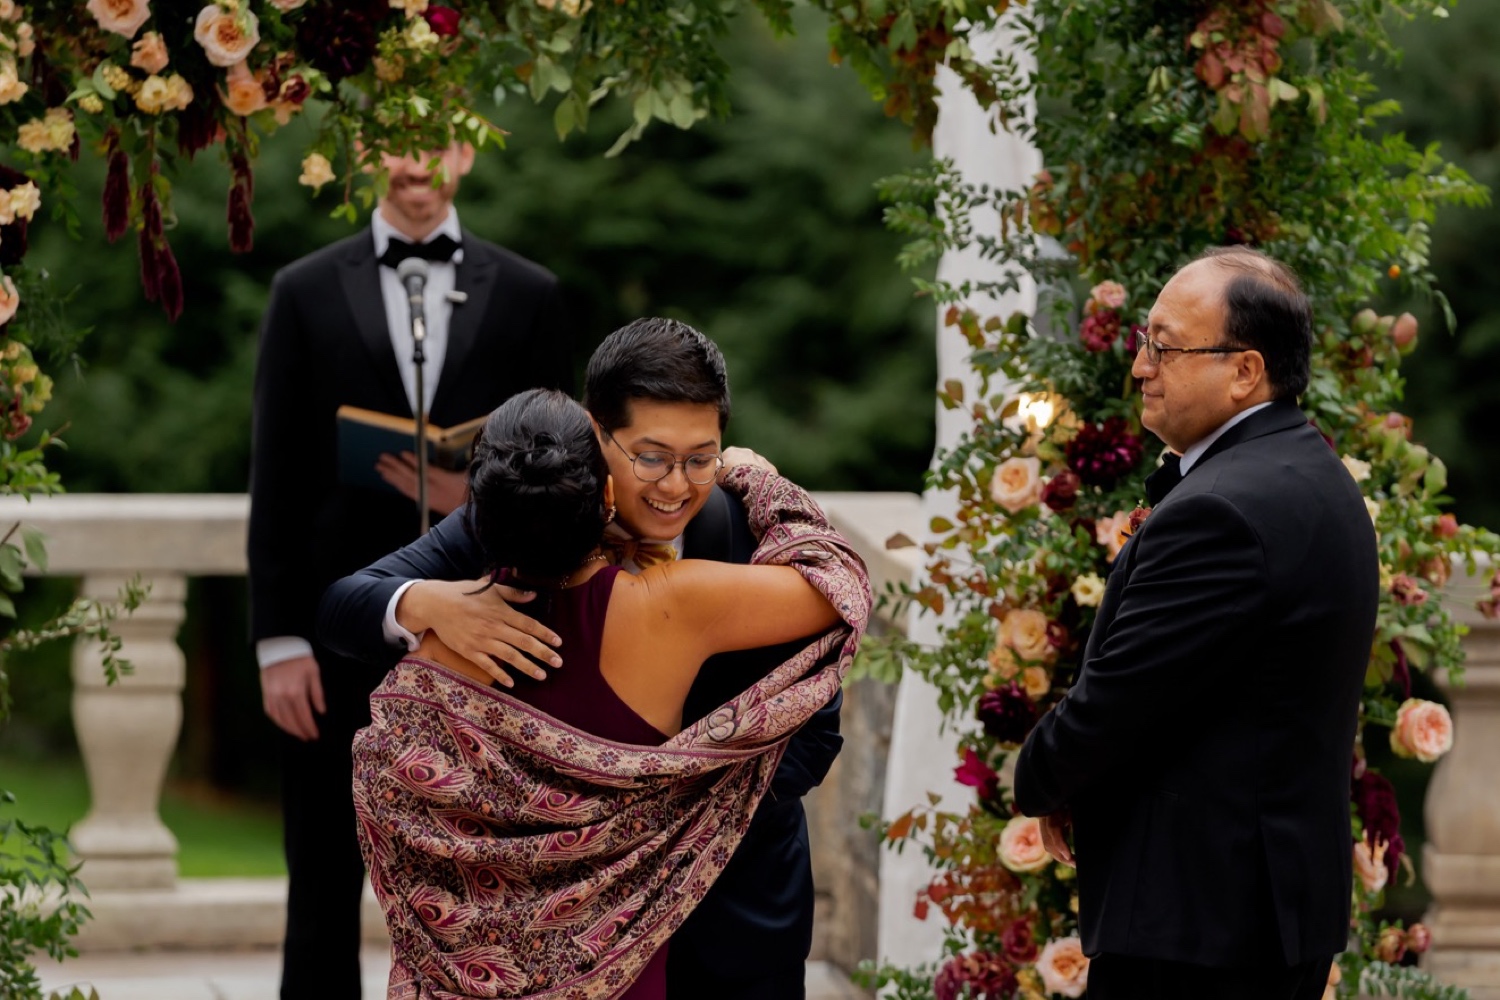 A groom hugging his mother during a wedding ceremony at the Tappan Hill Mansion.